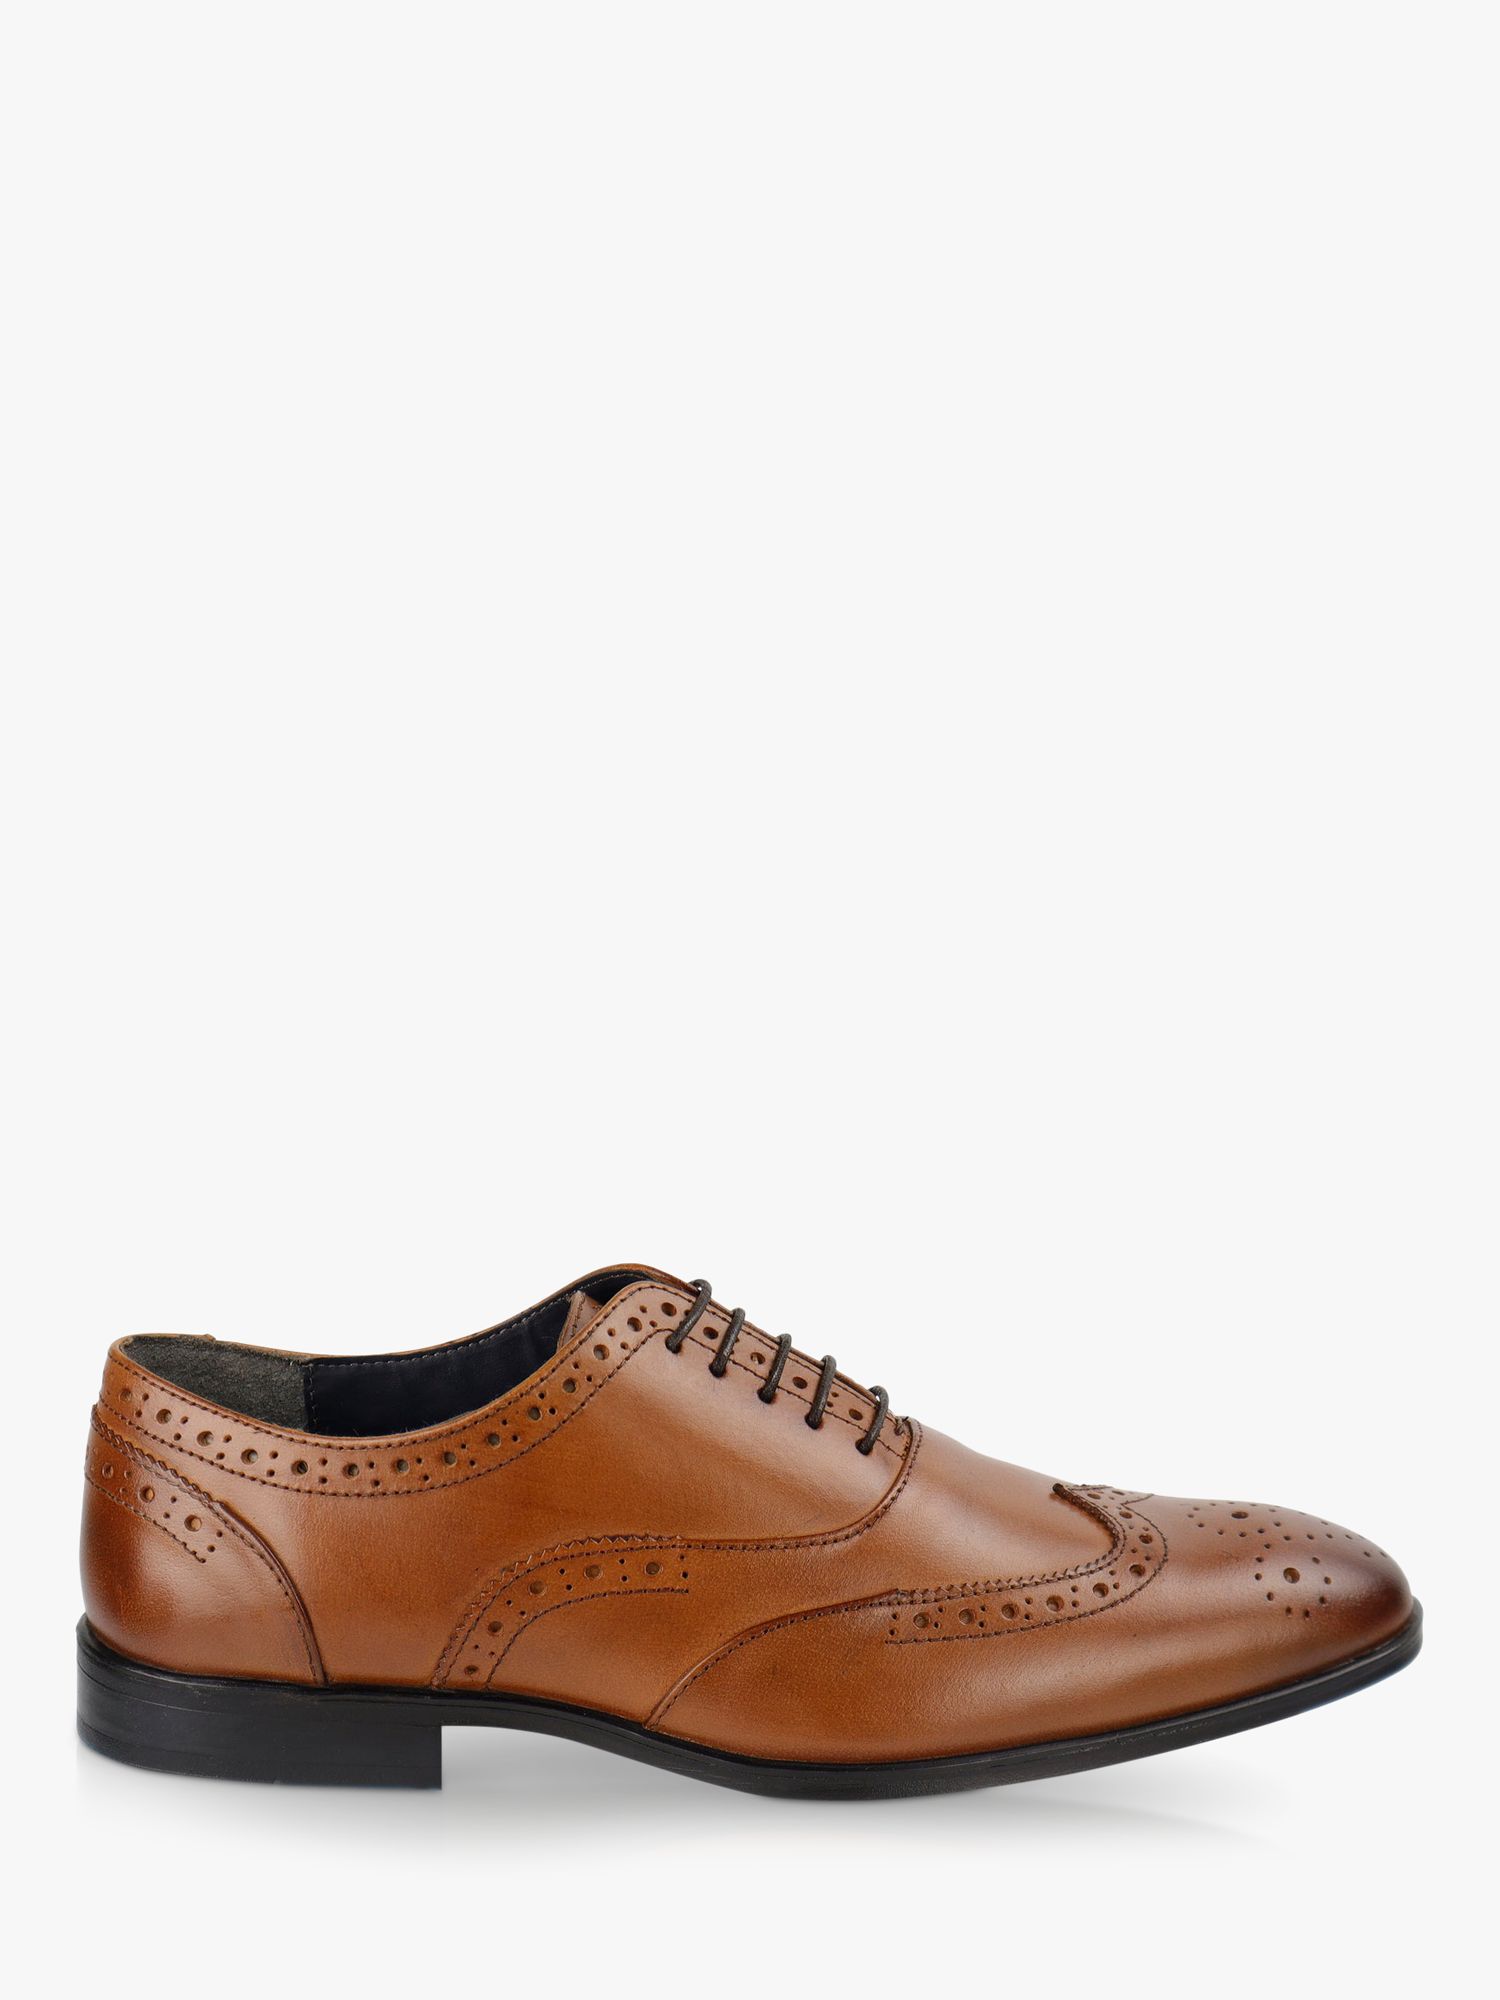 Silver Street London Leather Oxford Brogue Shoes, Tan at John Lewis ...